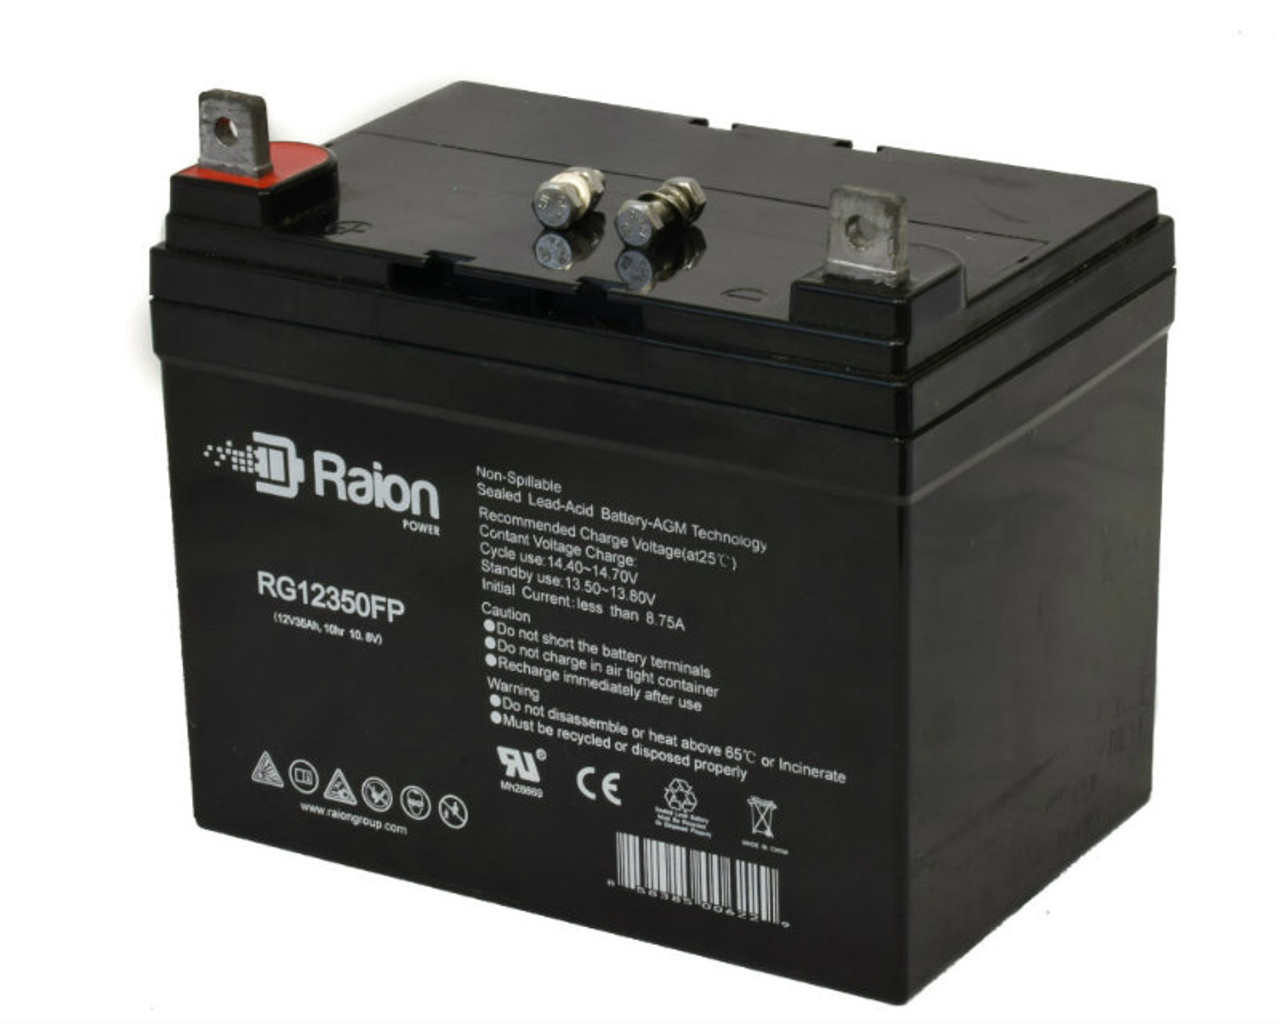 Raion Power Replacement 12V 35Ah RG12350FP Battery for CBB NP35-12